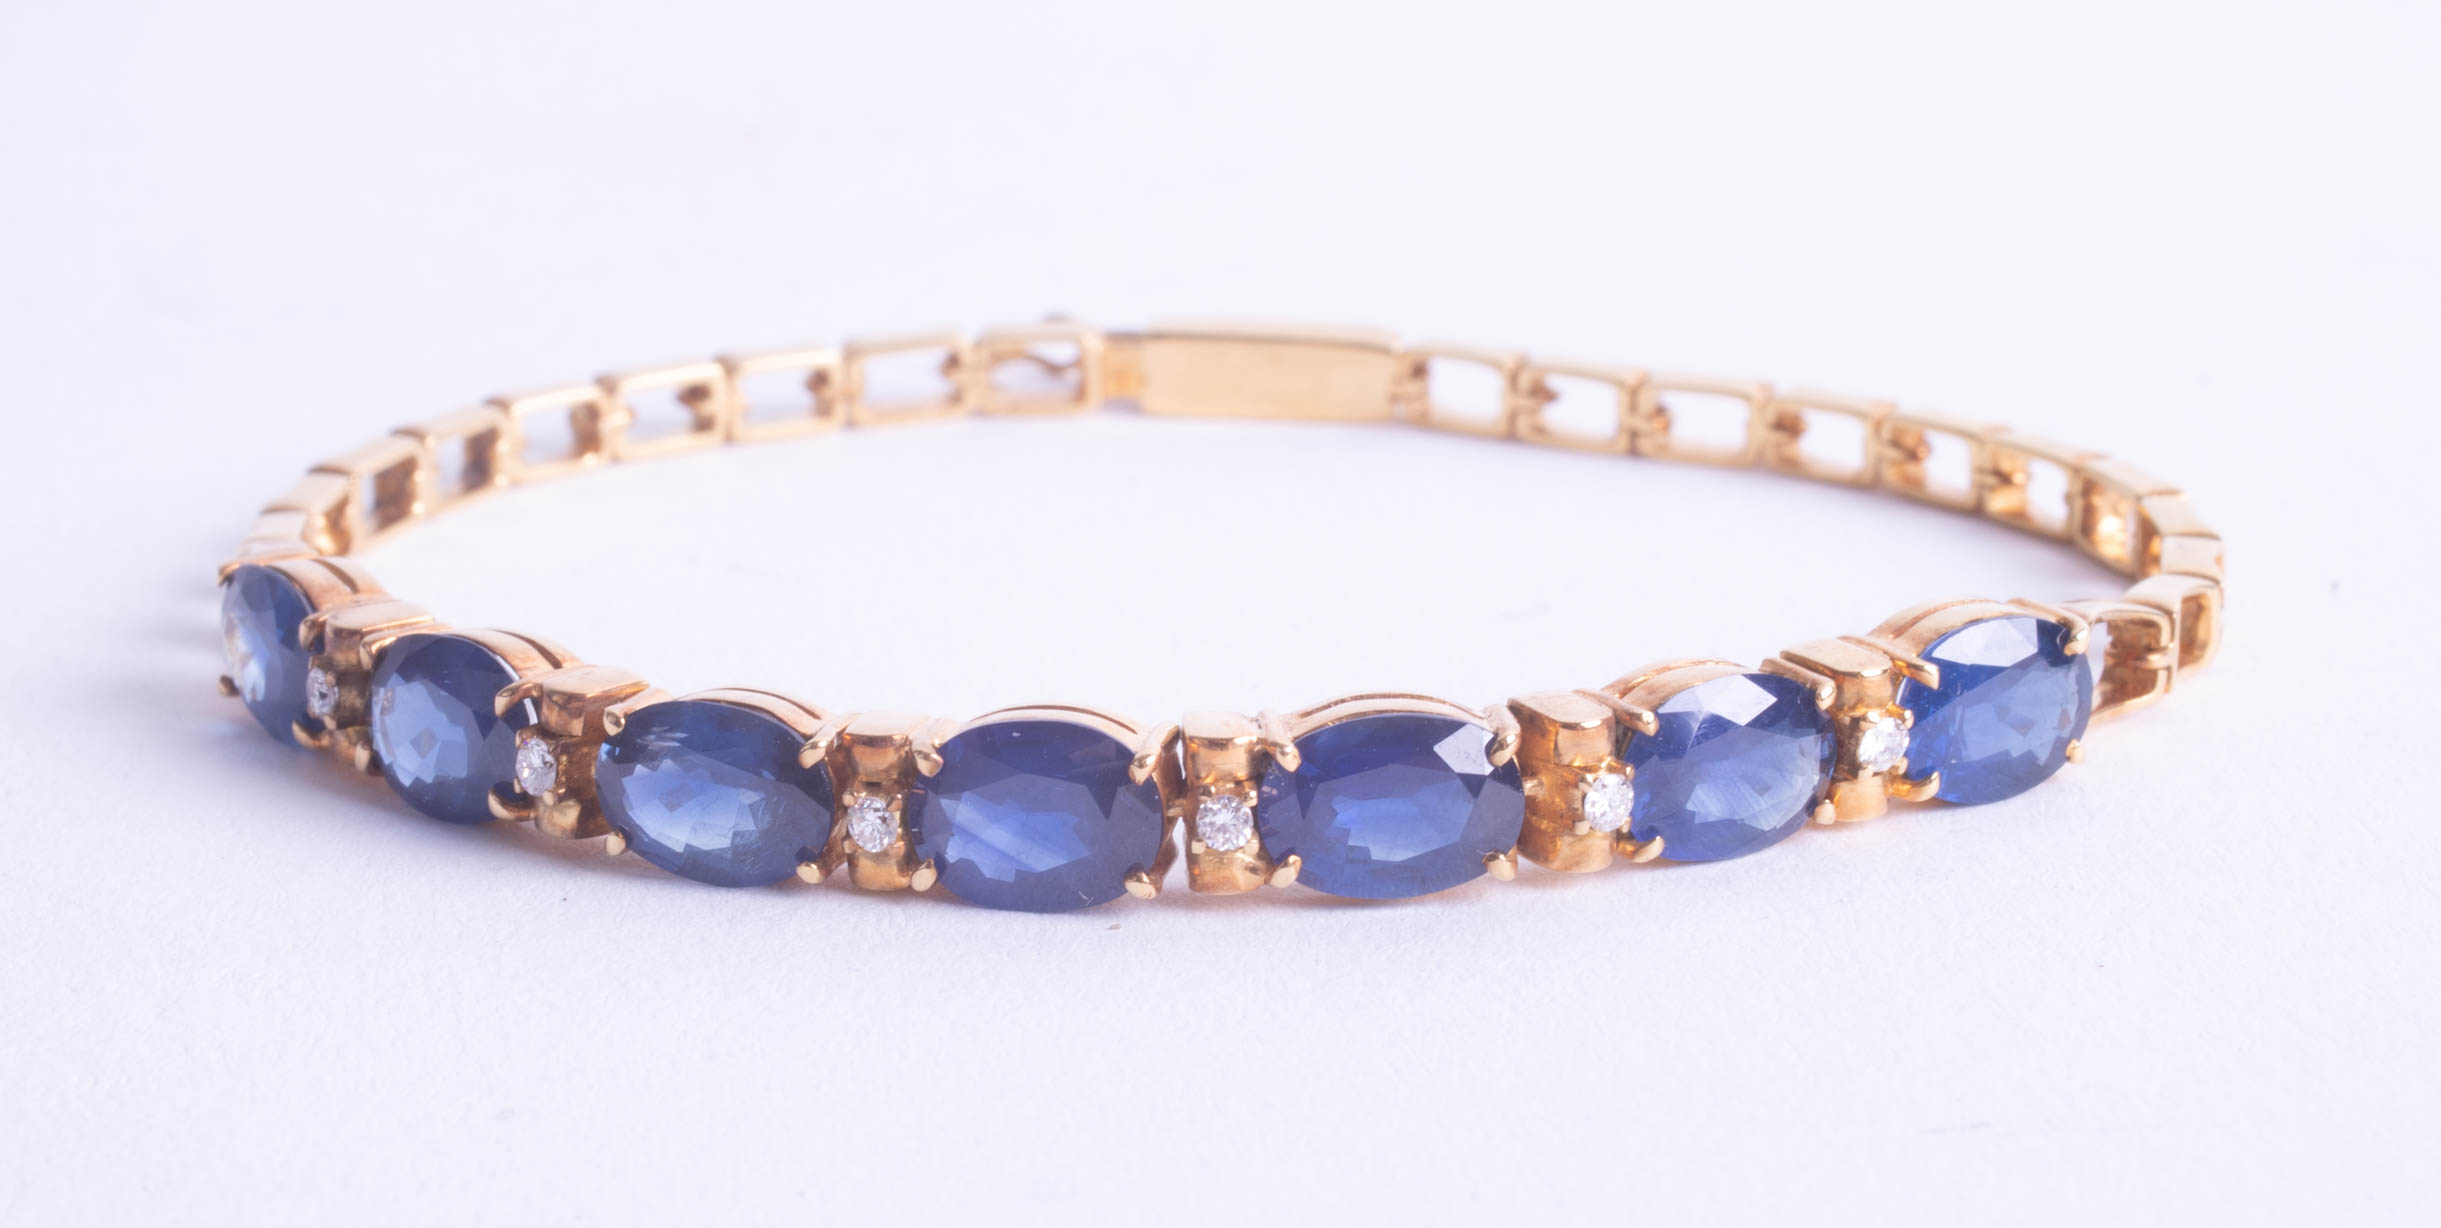 Sapphire and diamond set bracelet in yellow gold together with a certificate indicating 18ct gold